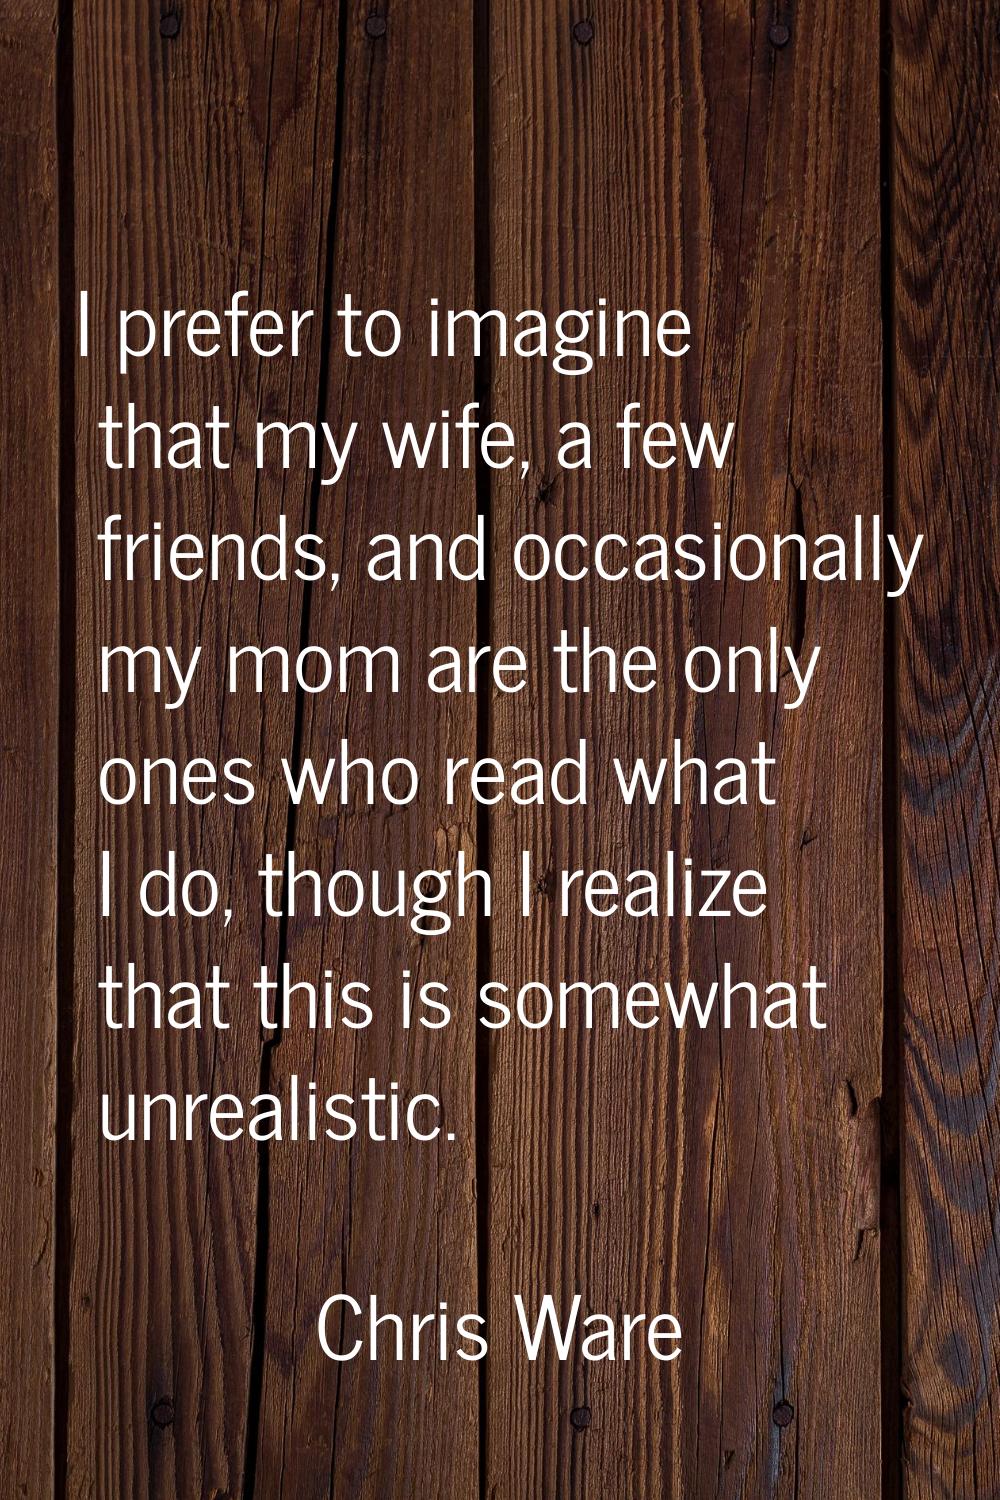 I prefer to imagine that my wife, a few friends, and occasionally my mom are the only ones who read